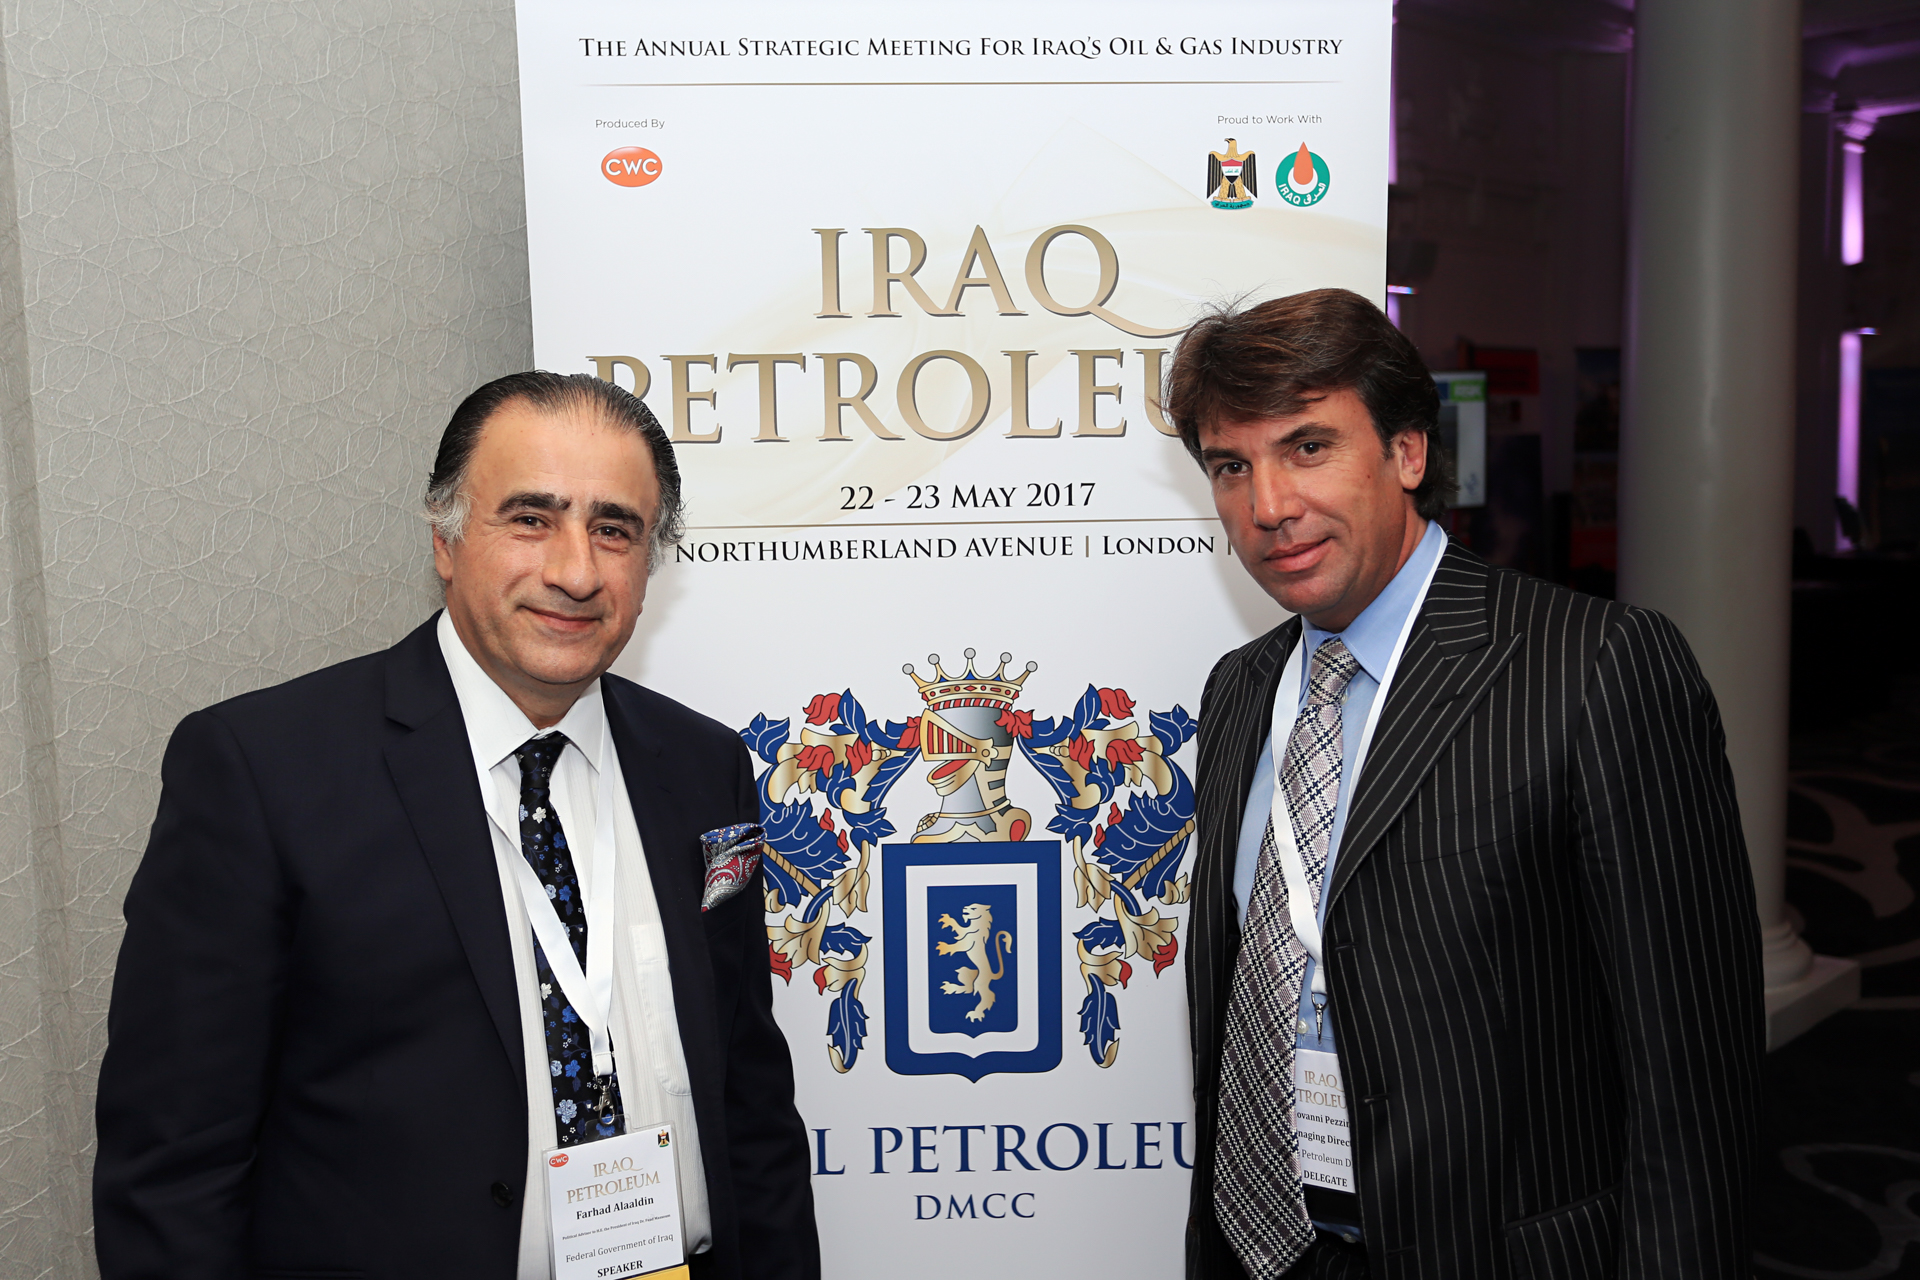 Dr. Farhad Alaaldin, Political Advisor to His Excellency President Of Iraq Dr. Fuad Massoum and Dr. Giovanni Pezzimenti, Managing Director of Real Petroleum DMCC.